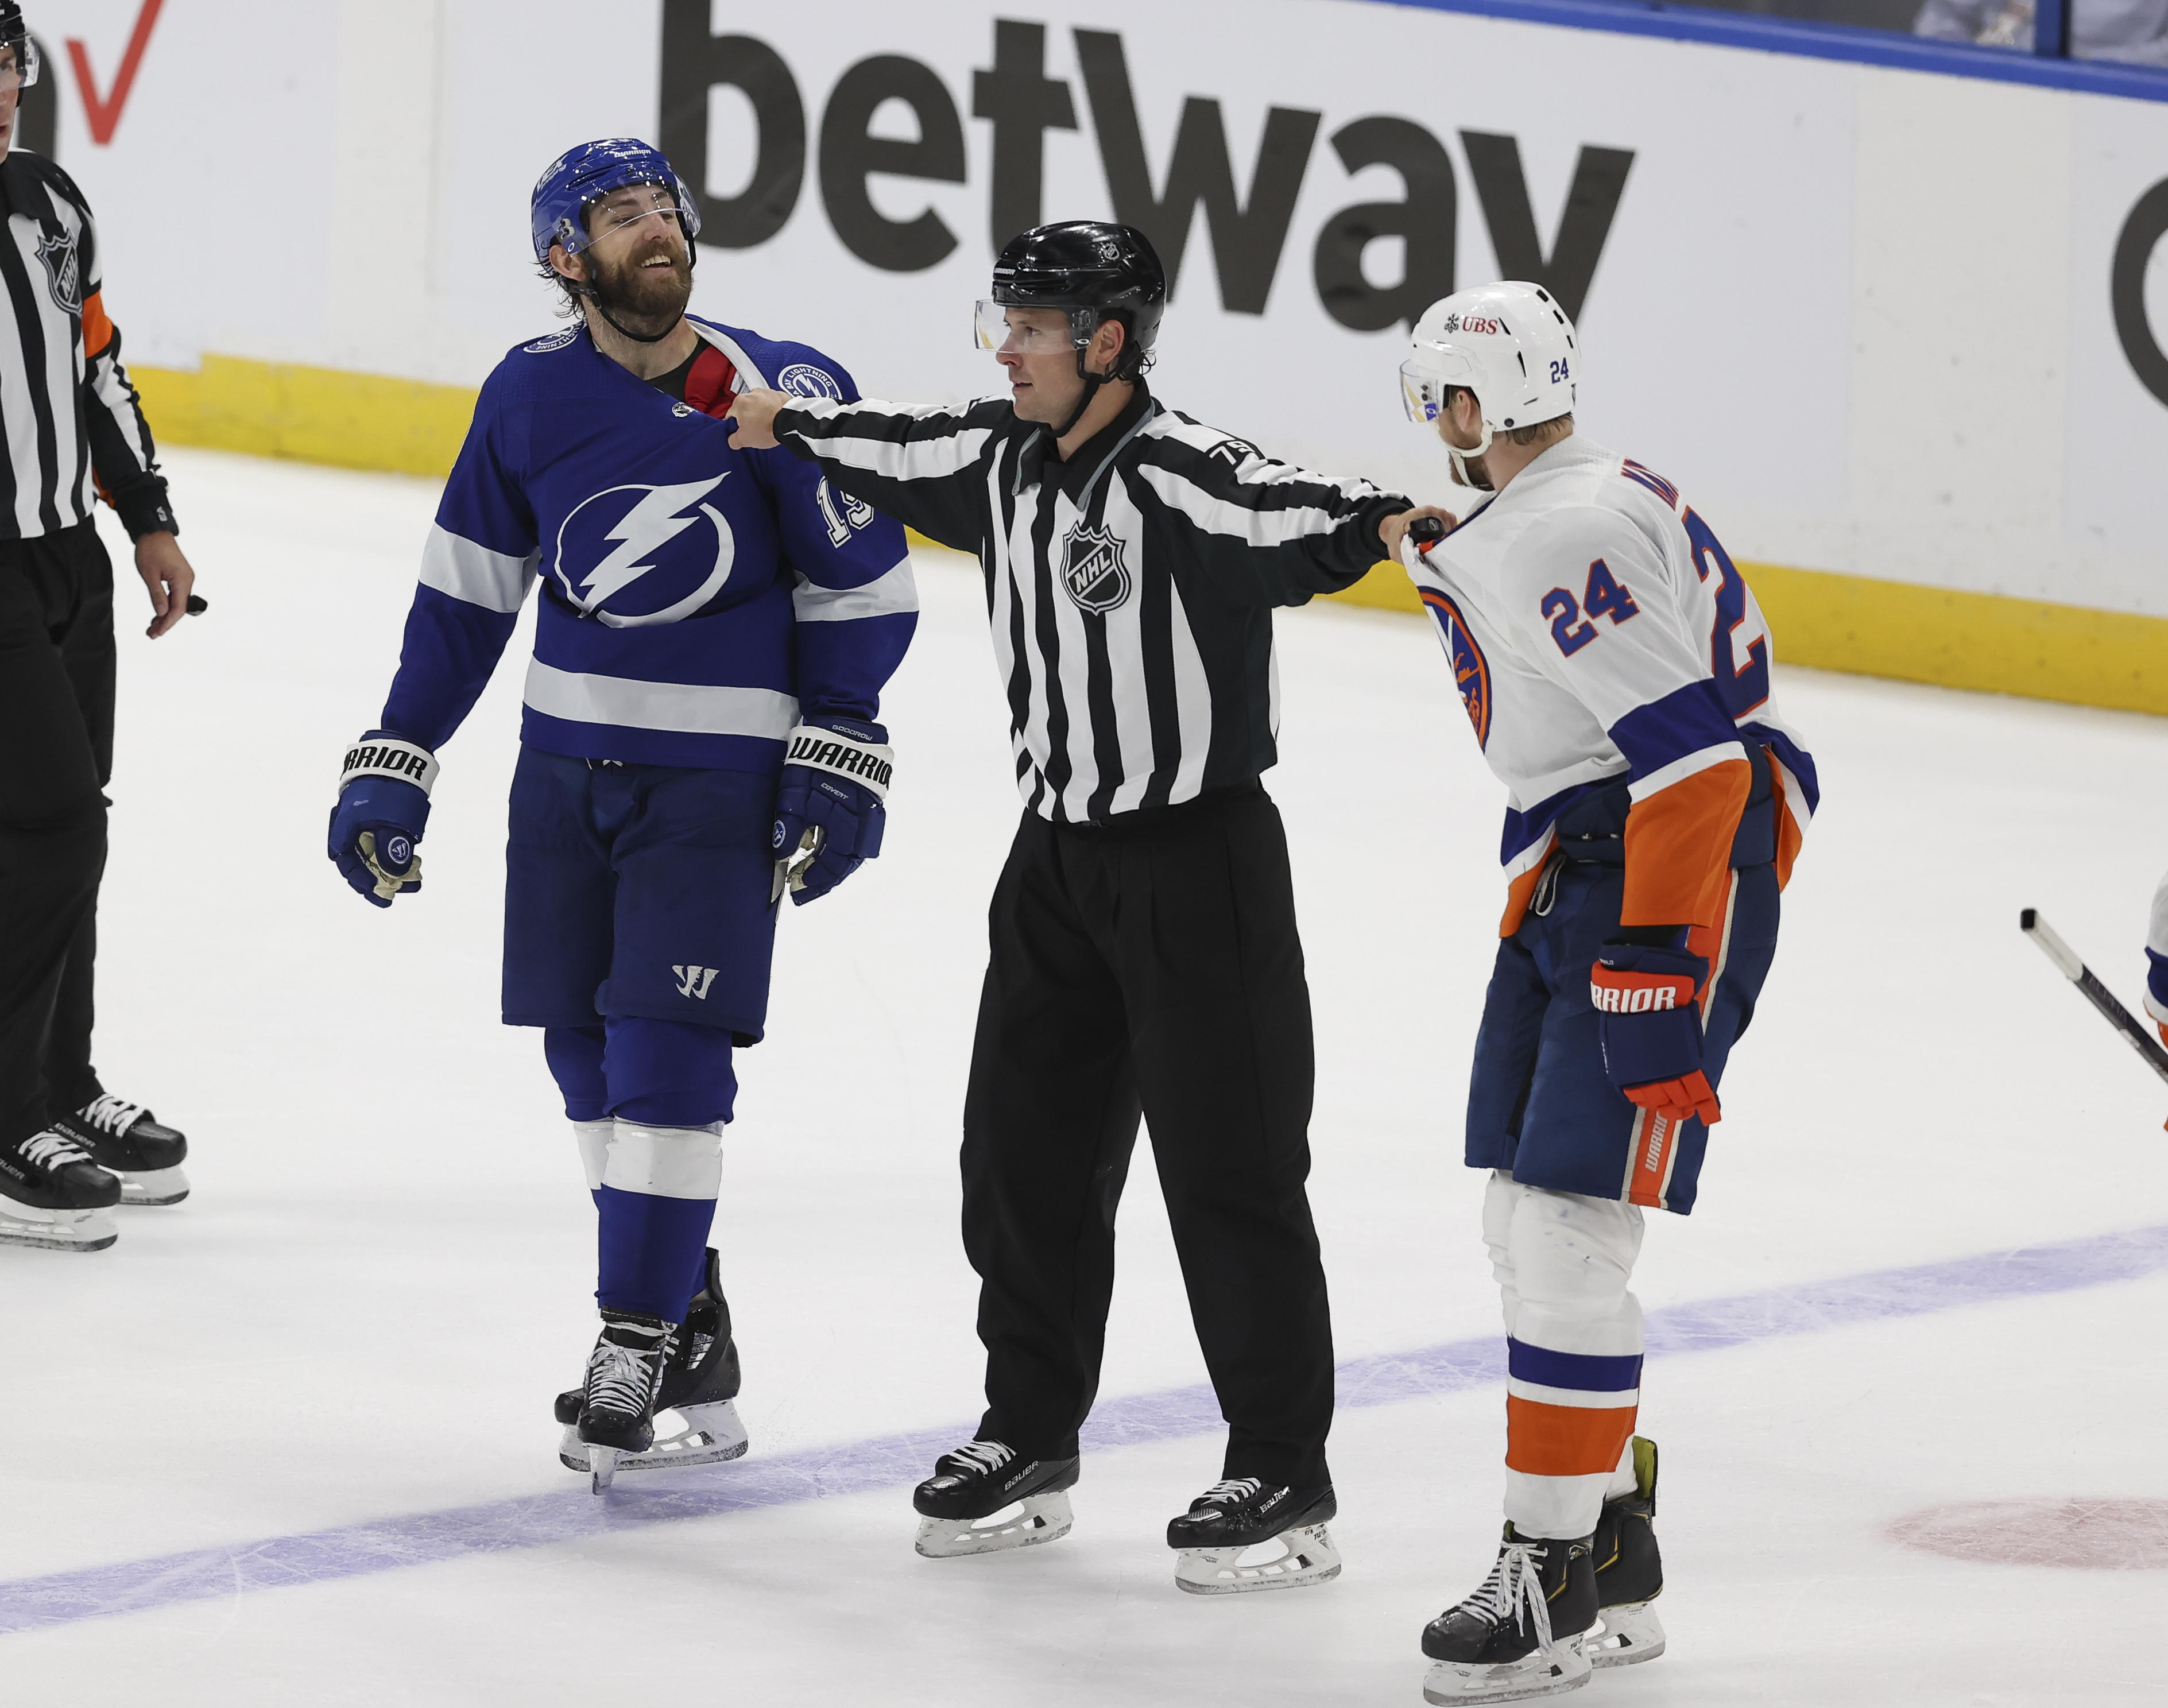 Tampa Bay Lightning right wing Barclay Goodrow (19) is separated from New York Islanders defenseman Scott Mayfield (24) by linesman Kiel Murchison (79) in the third period of Game 5 of the Stanley Cup Playoffs Semifinals between the New York Islanders and Tampa Bay Lightning on June 21, 2021 at Amalie Arena in Tampa, FL.